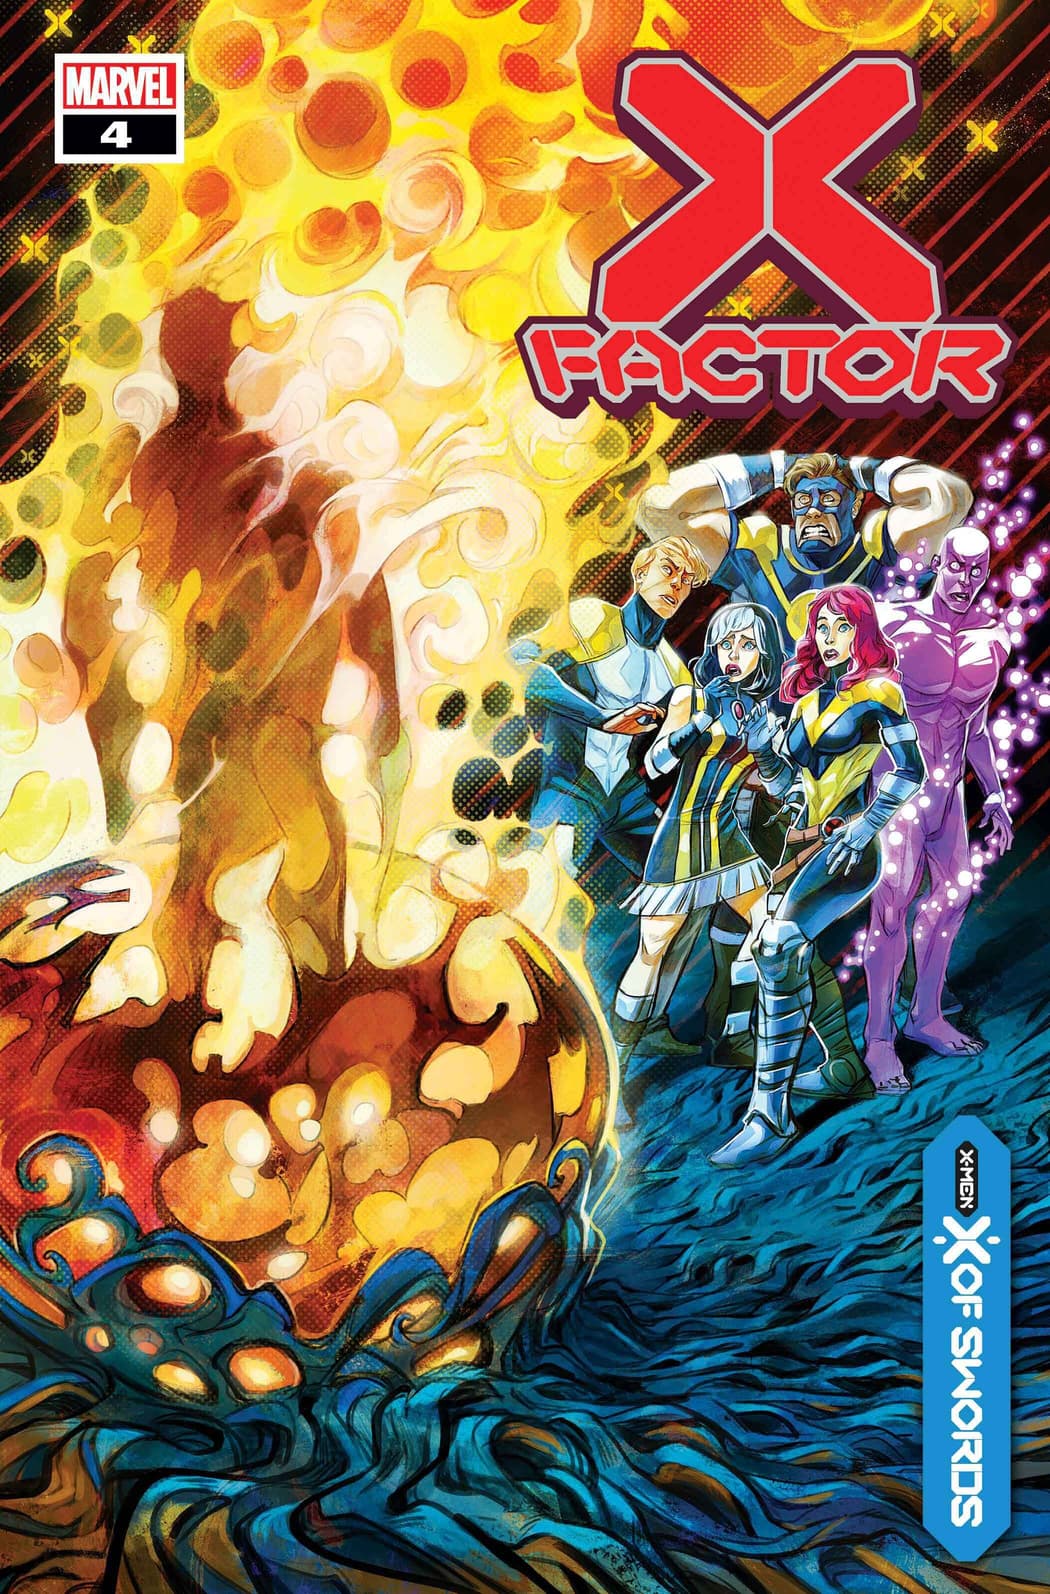 X-FACTOR #4 WRITTEN BY LEAH WILLIAMS, ART BY CARLOS GOMEZ, COVER BY IVAN SHAVRIN